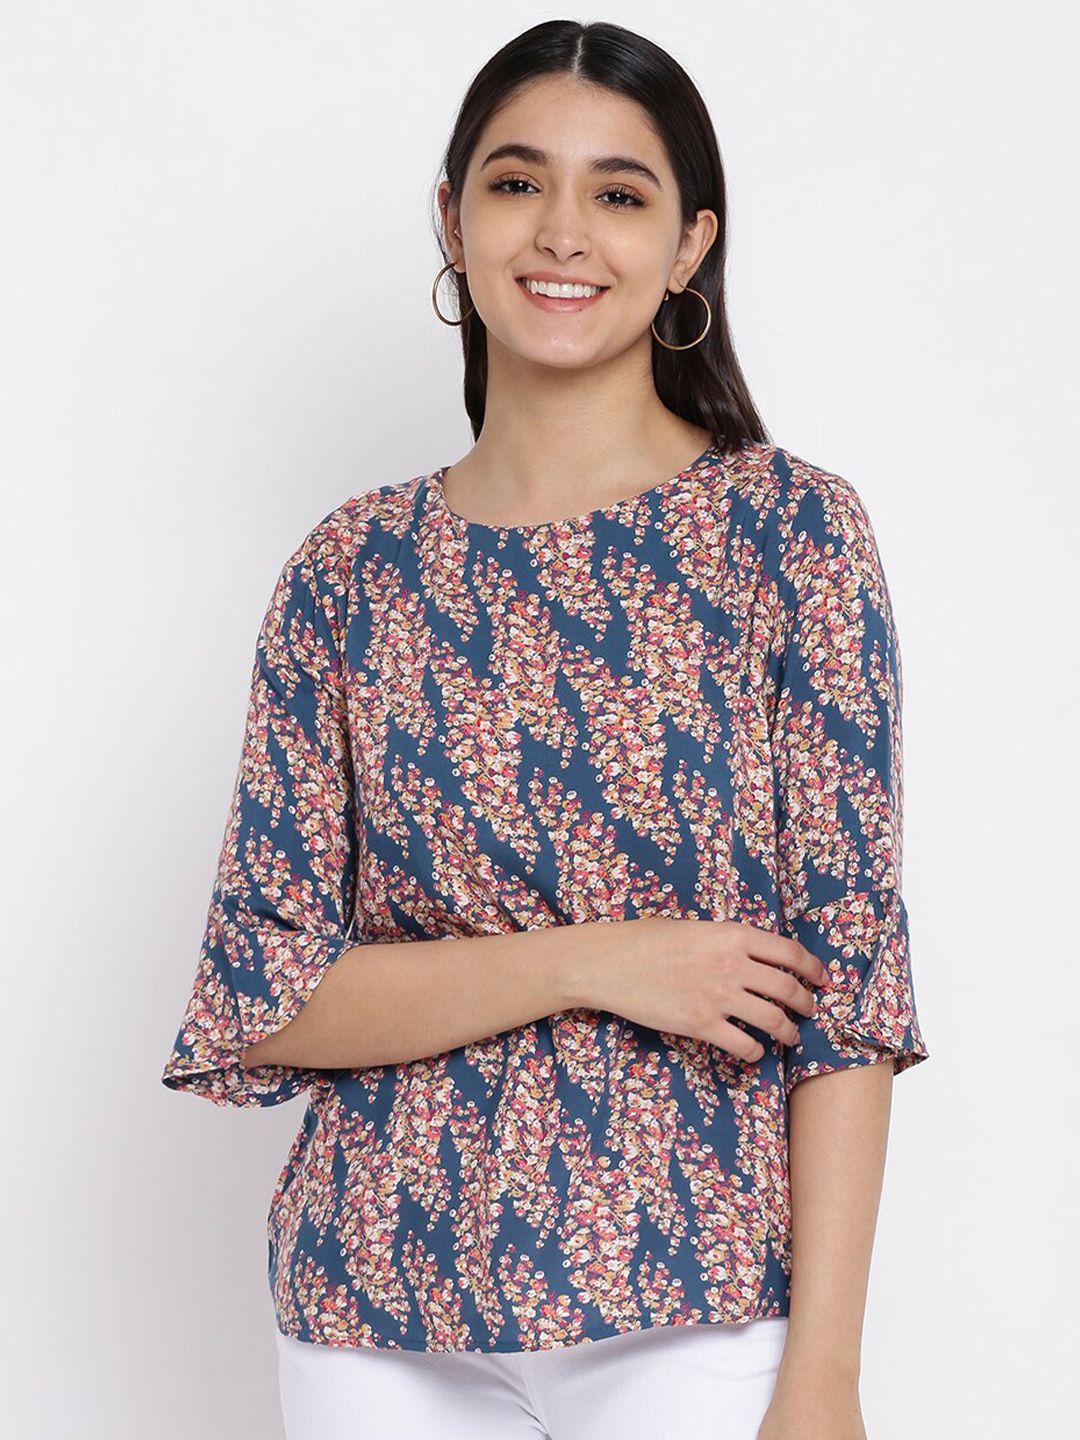 abof Teal & Pink Floral Print Round Neck Top Price in India